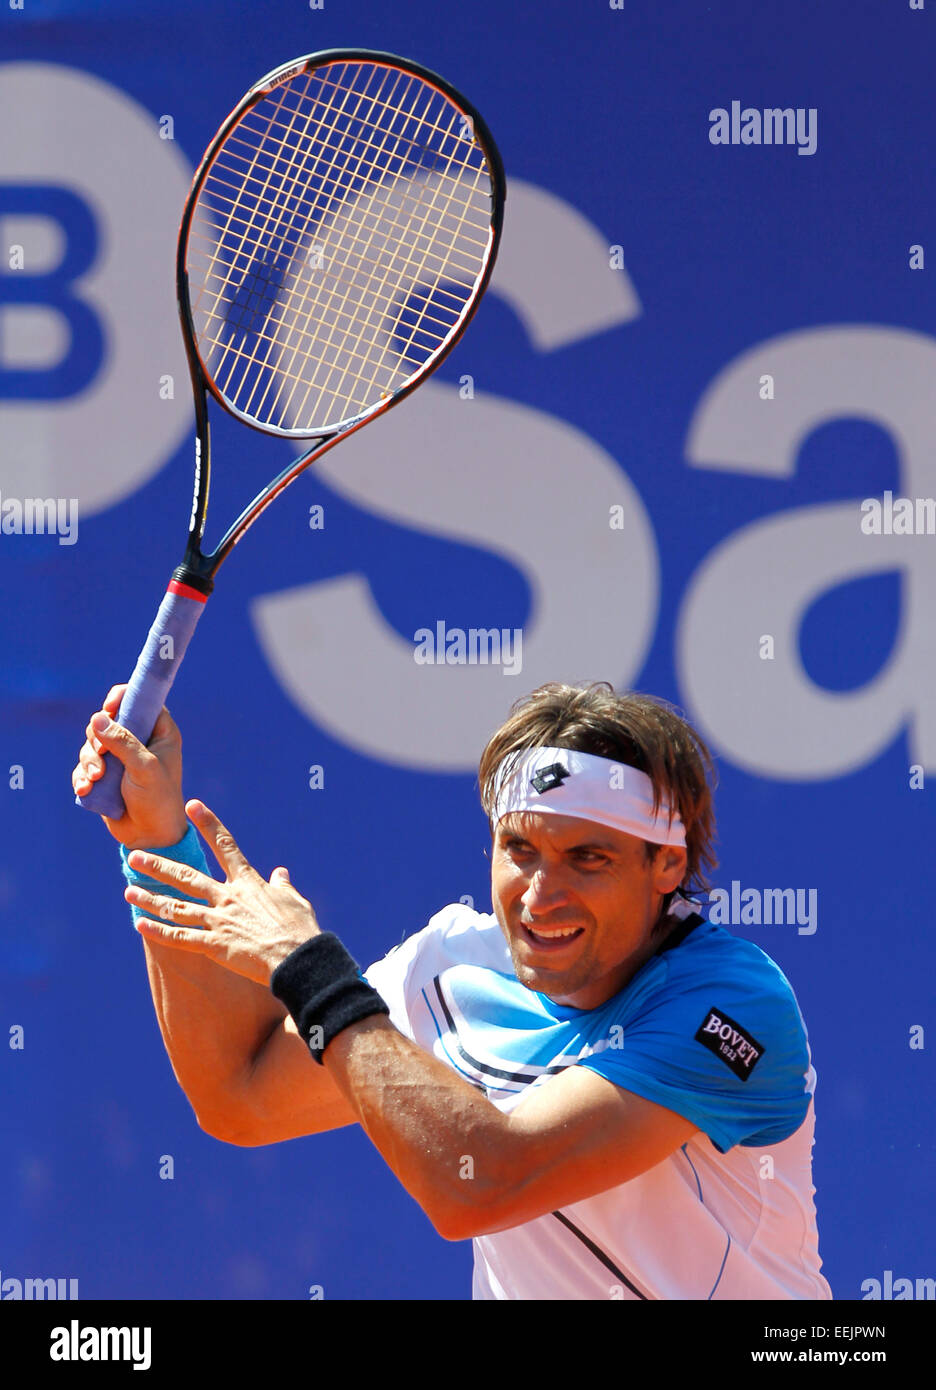 Spanish tennis player David Ferrer playing at the Banc Sabadell ATP open in  Barcelona, Spain Stock Photo - Alamy